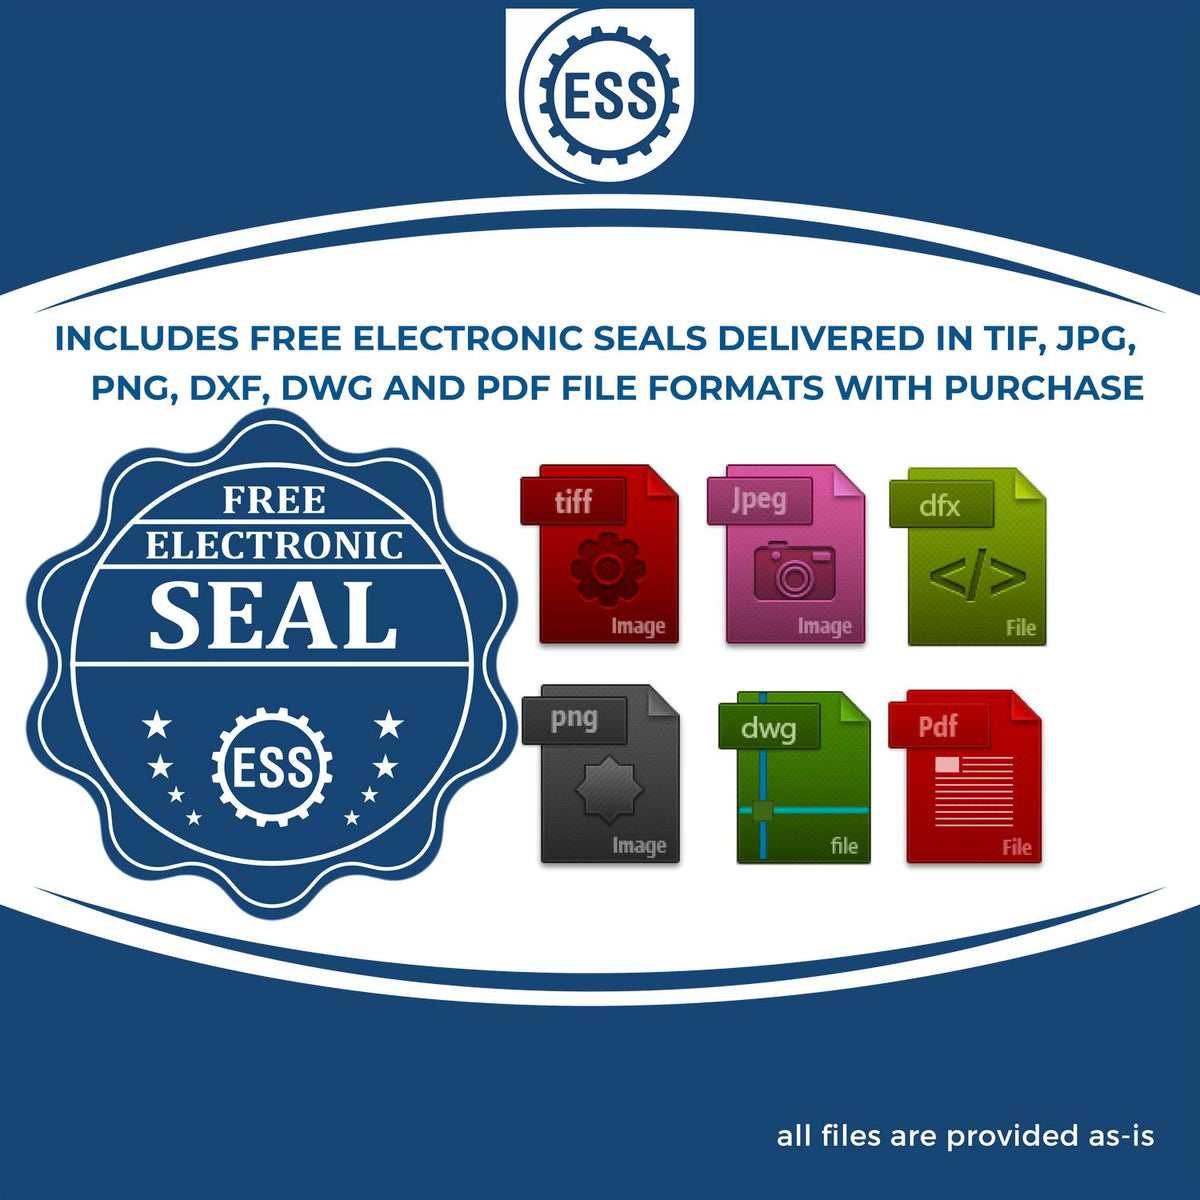 An infographic for the free electronic seal for the Slim Pre-Inked Hawaii Architect Seal Stamp illustrating the different file type icons such as DXF, DWG, TIF, JPG and PNG.